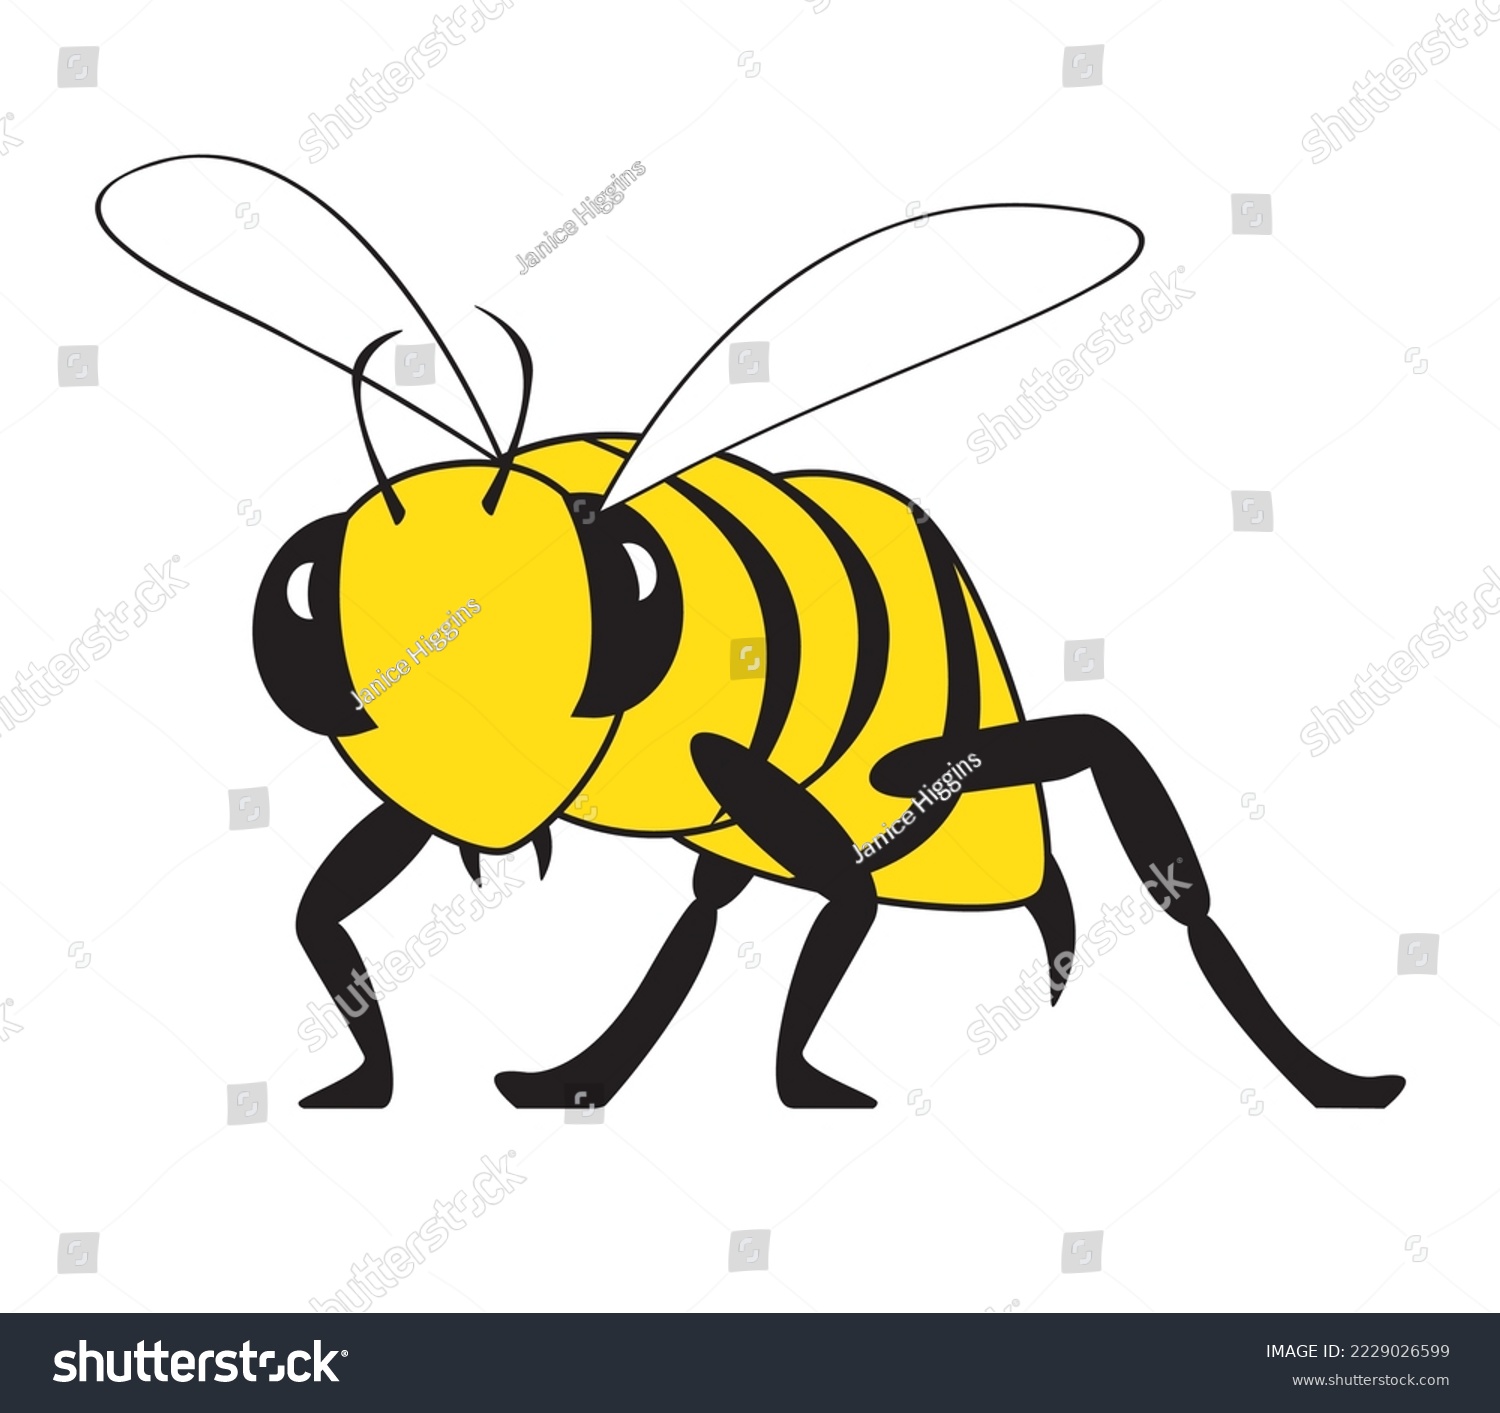 SVG of Angry bee looking at you isolated on white. Yellow jacket looking angry with stinger. Pest control svg